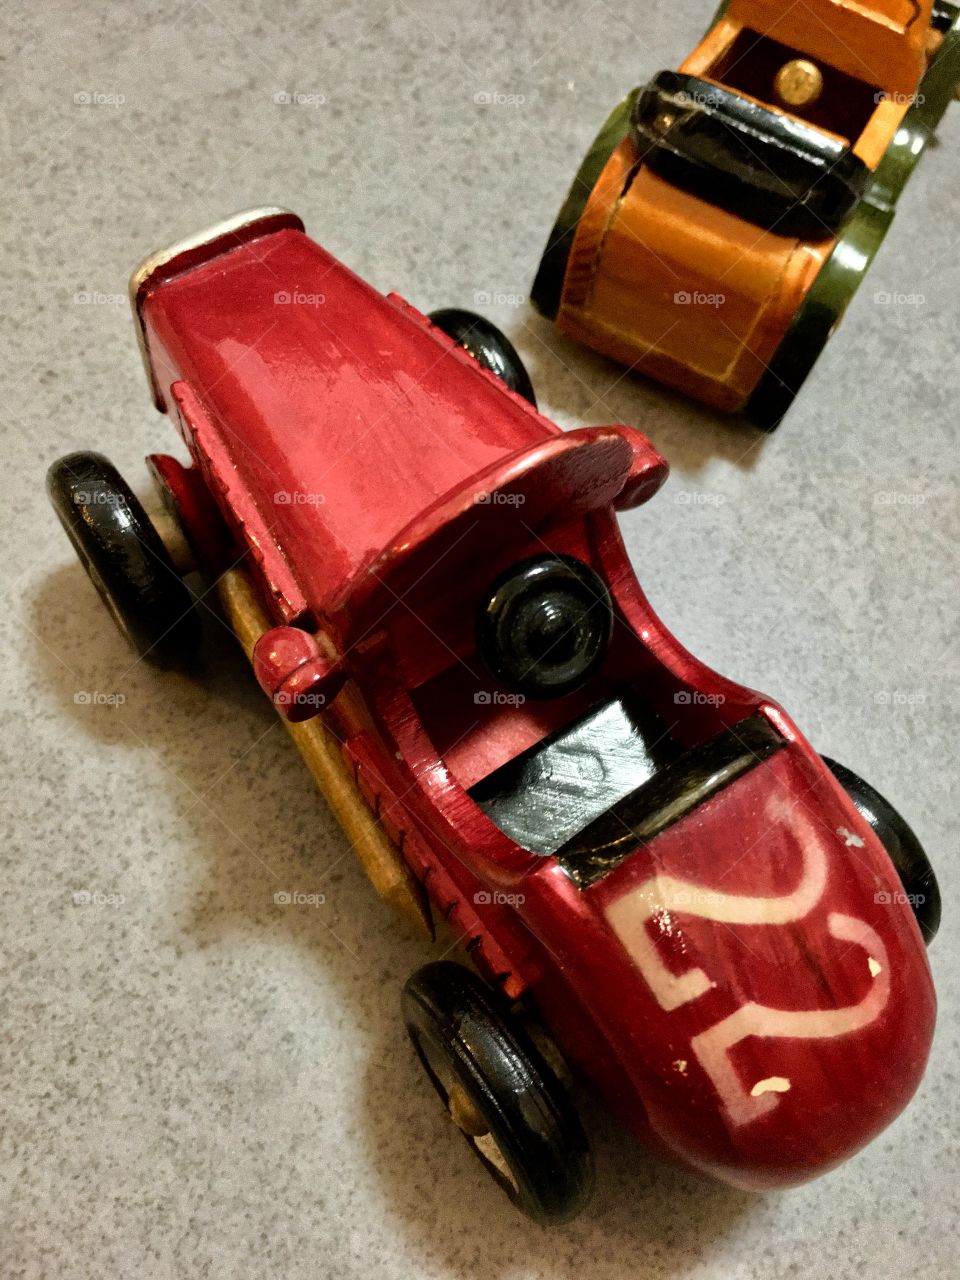 This wood car reminds me of my playful childhood 